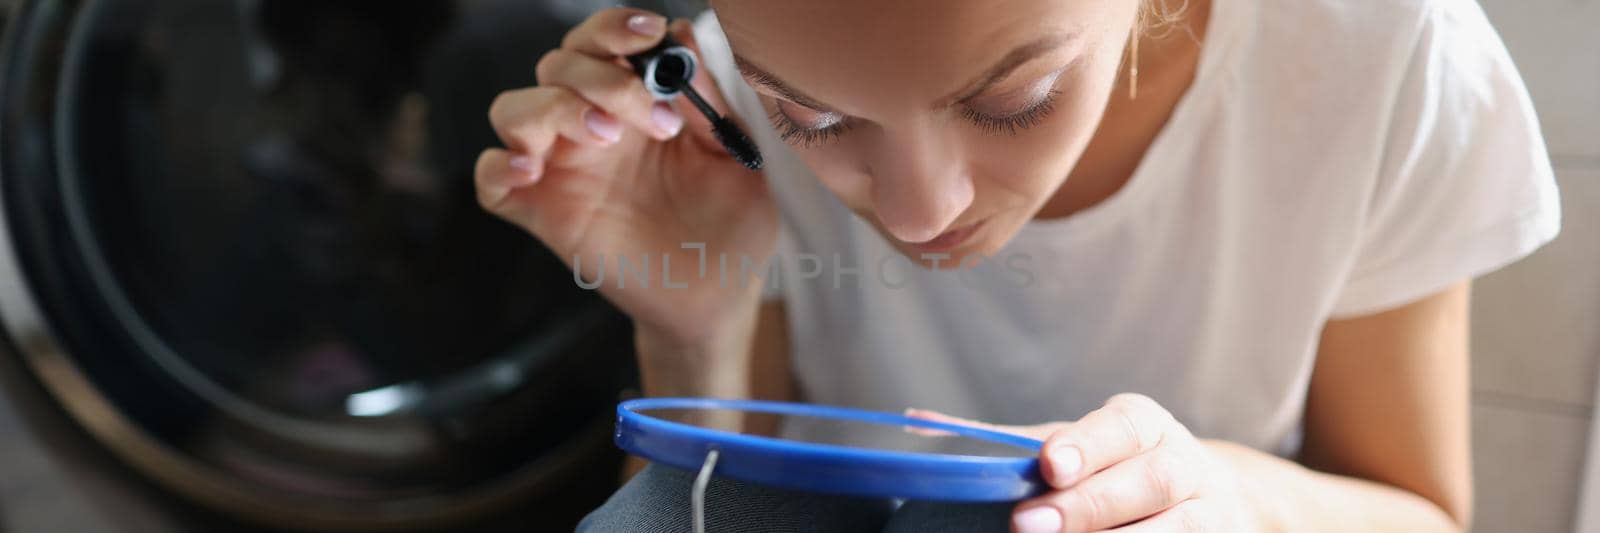 Close-up of woman getting ready for work, applying mascara using small mirror. Female in rush, doing makeup on floor in bathroom. Get ready, hurry, morning routine concept